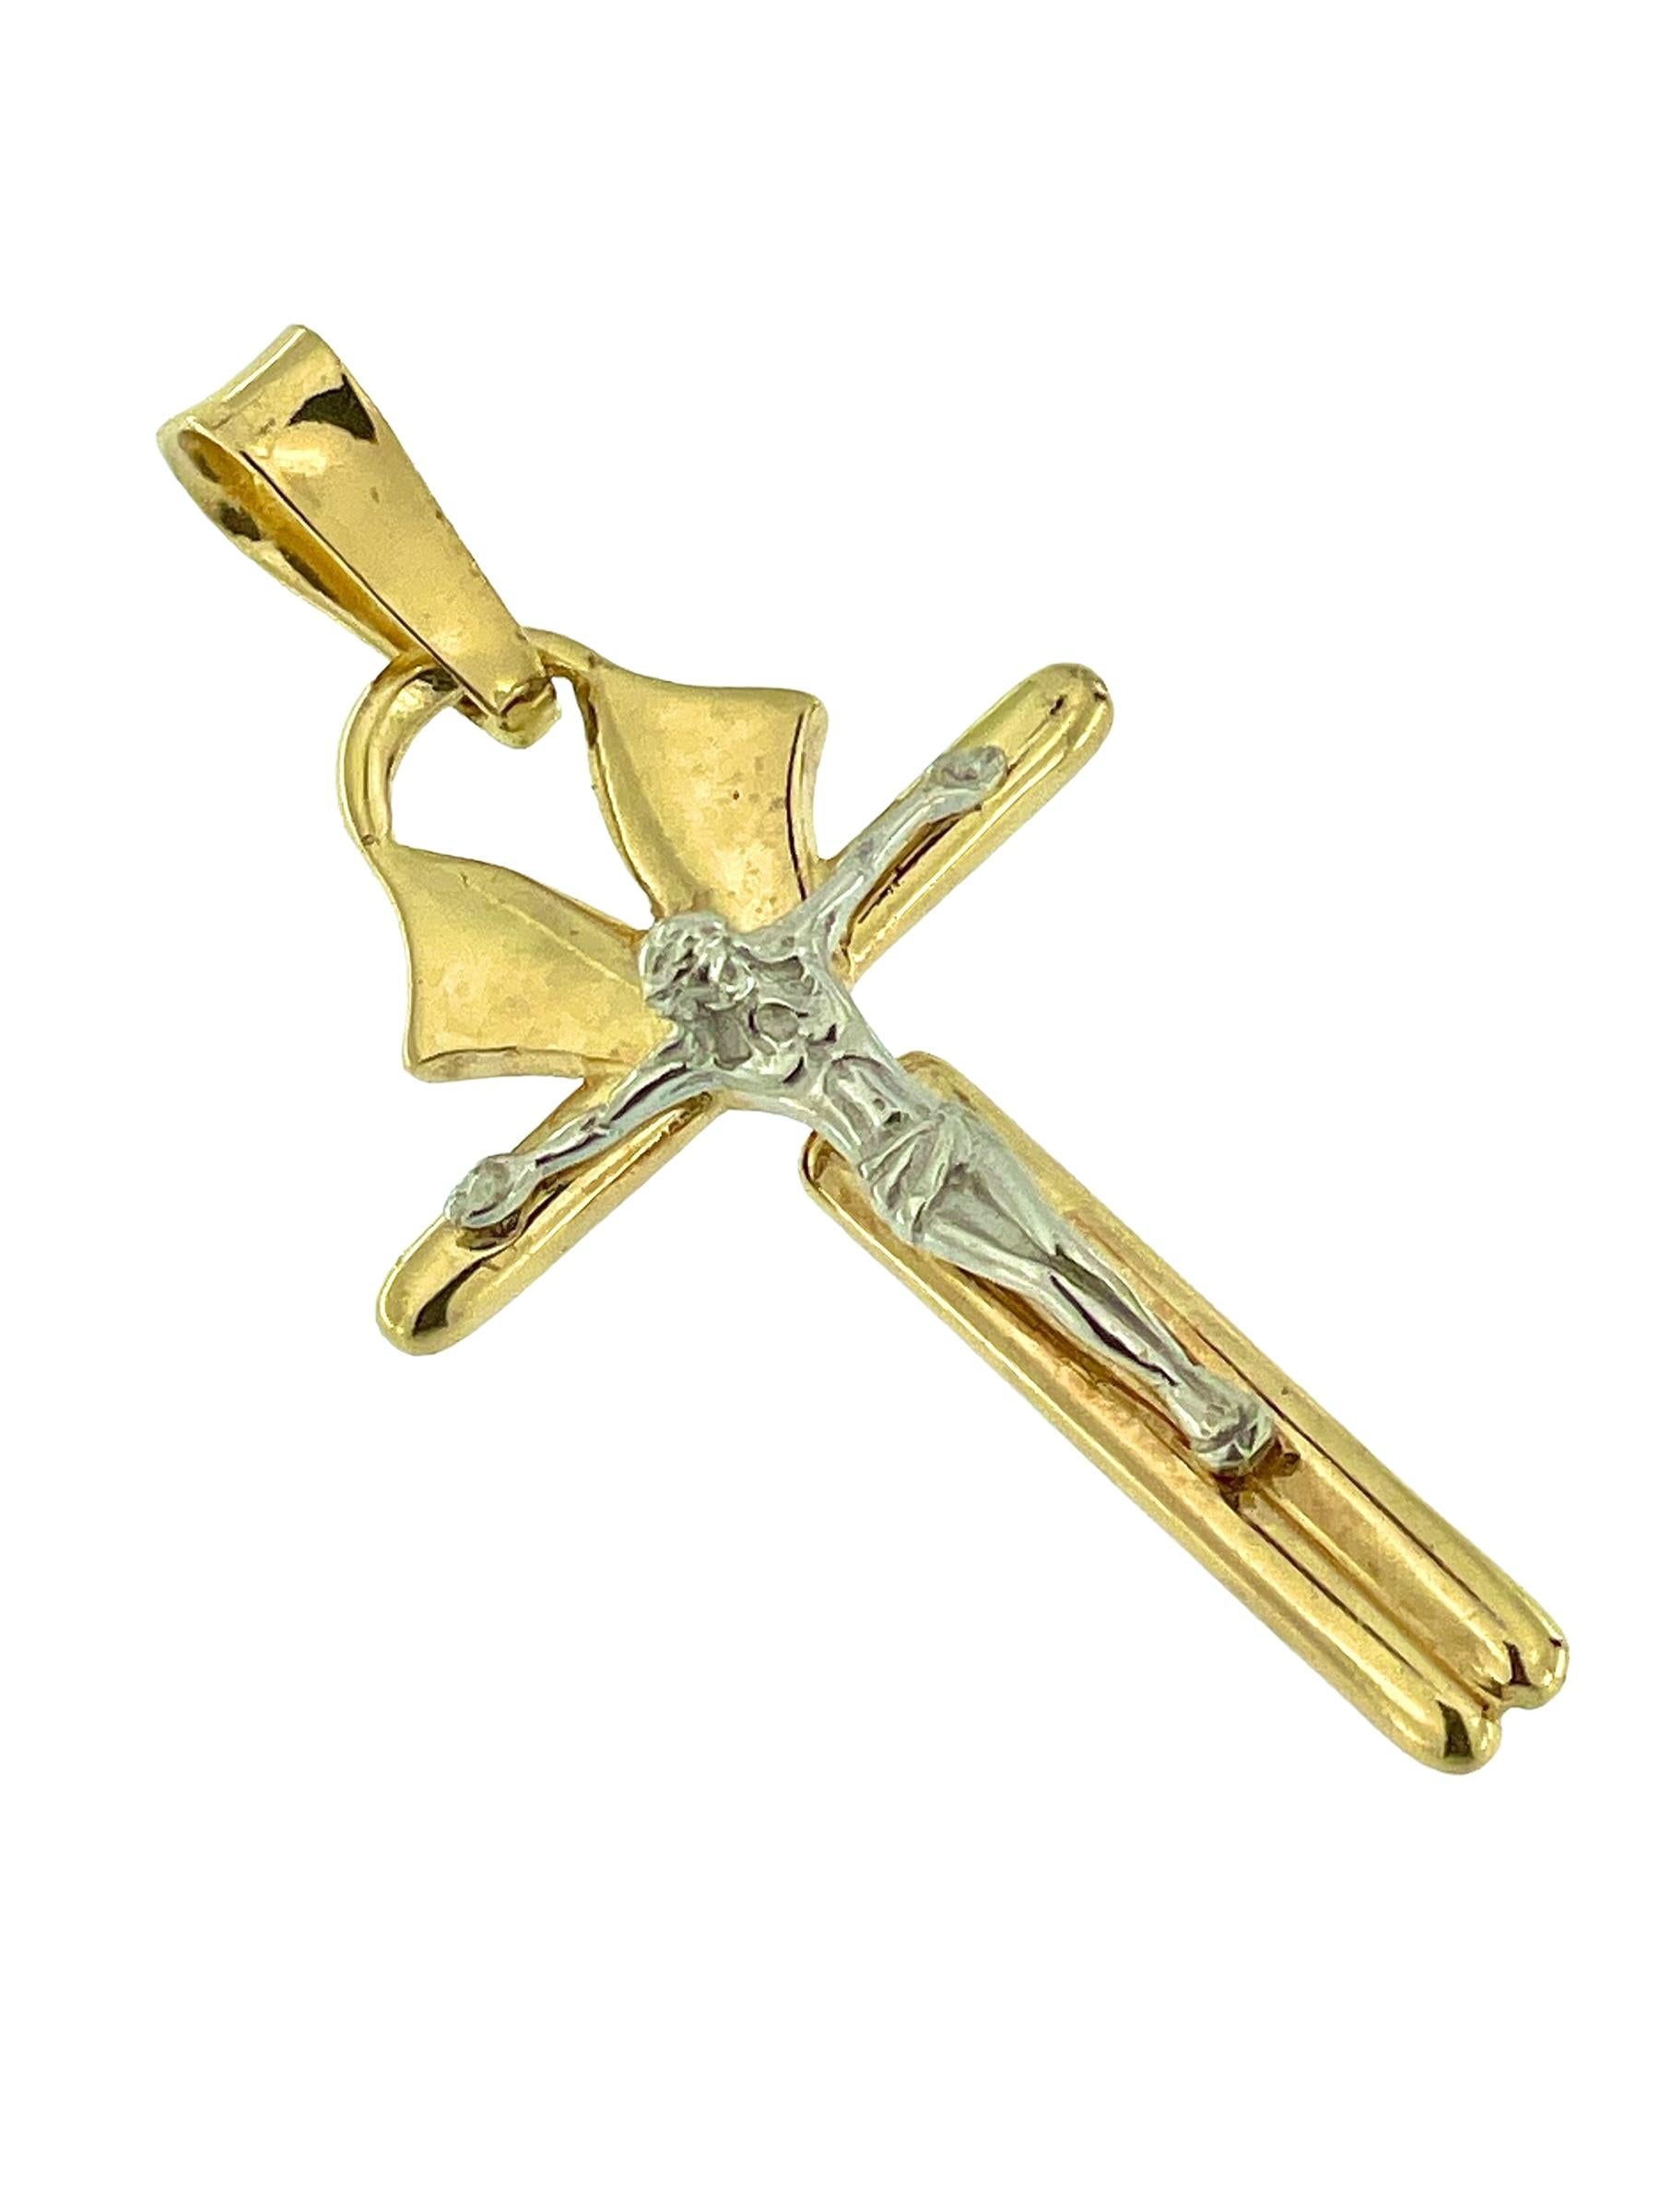 Italian Modern Crucifix Yellow and White Gold Stylized Coptic Style In Good Condition For Sale In Esch sur Alzette, Esch-sur-Alzette